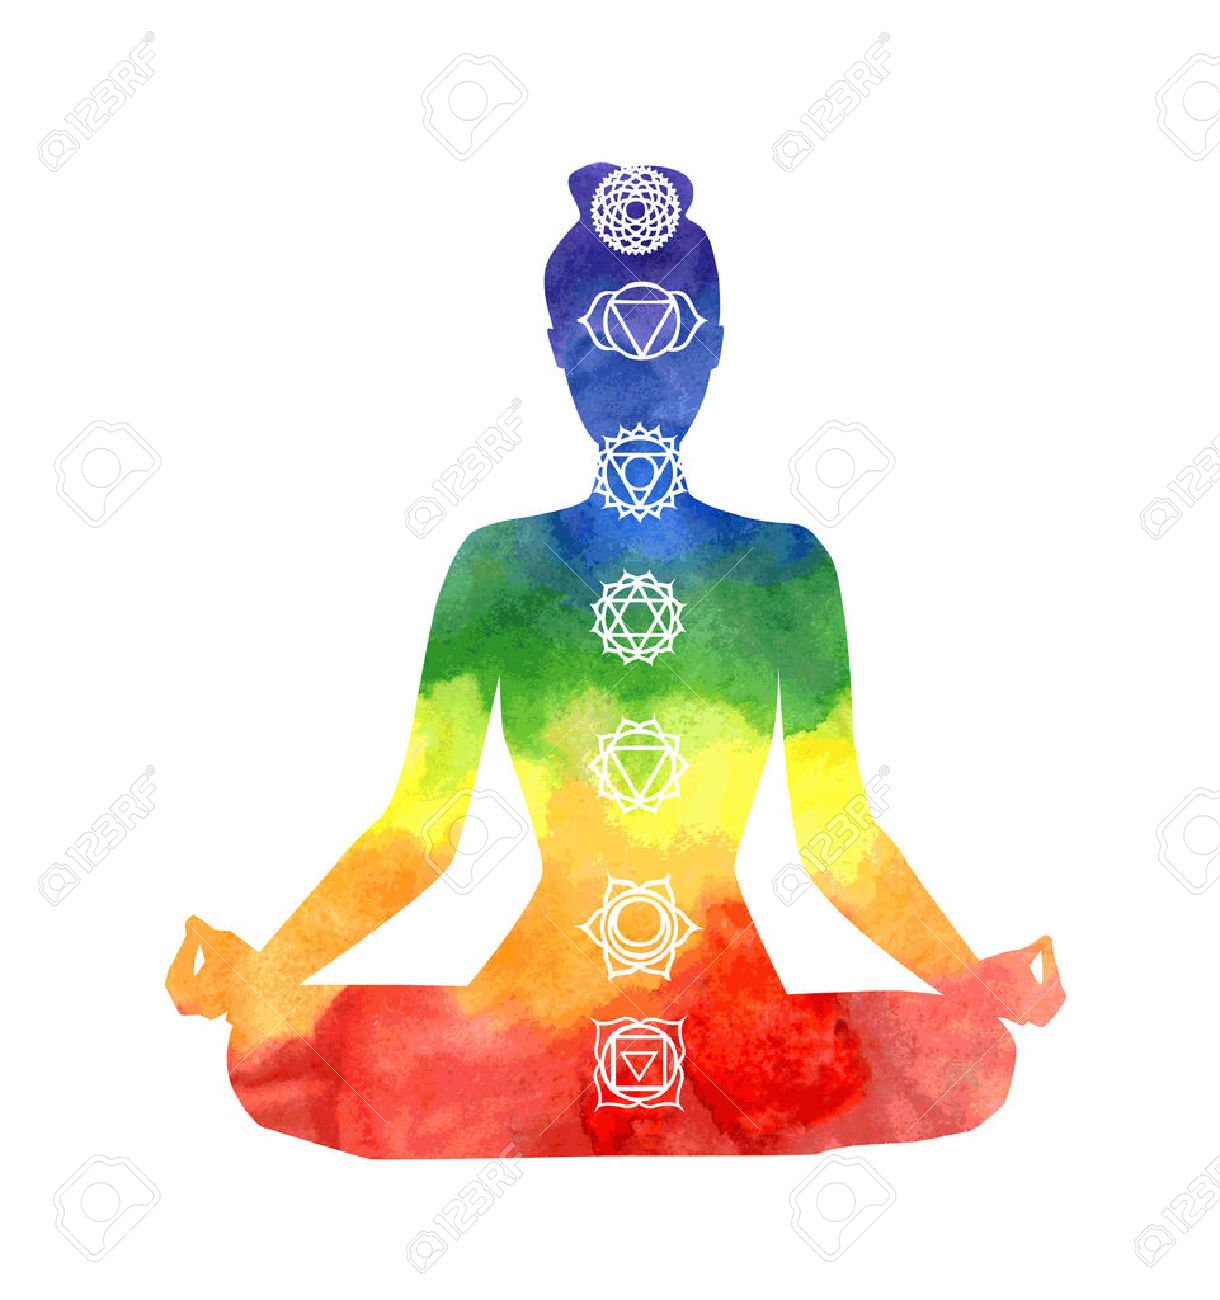 51445030-Vector-silhouette-of-yoga-woman-with-chakra-symbols-Bright-watercolor-texture-and-white-background-P-Stock-Vector